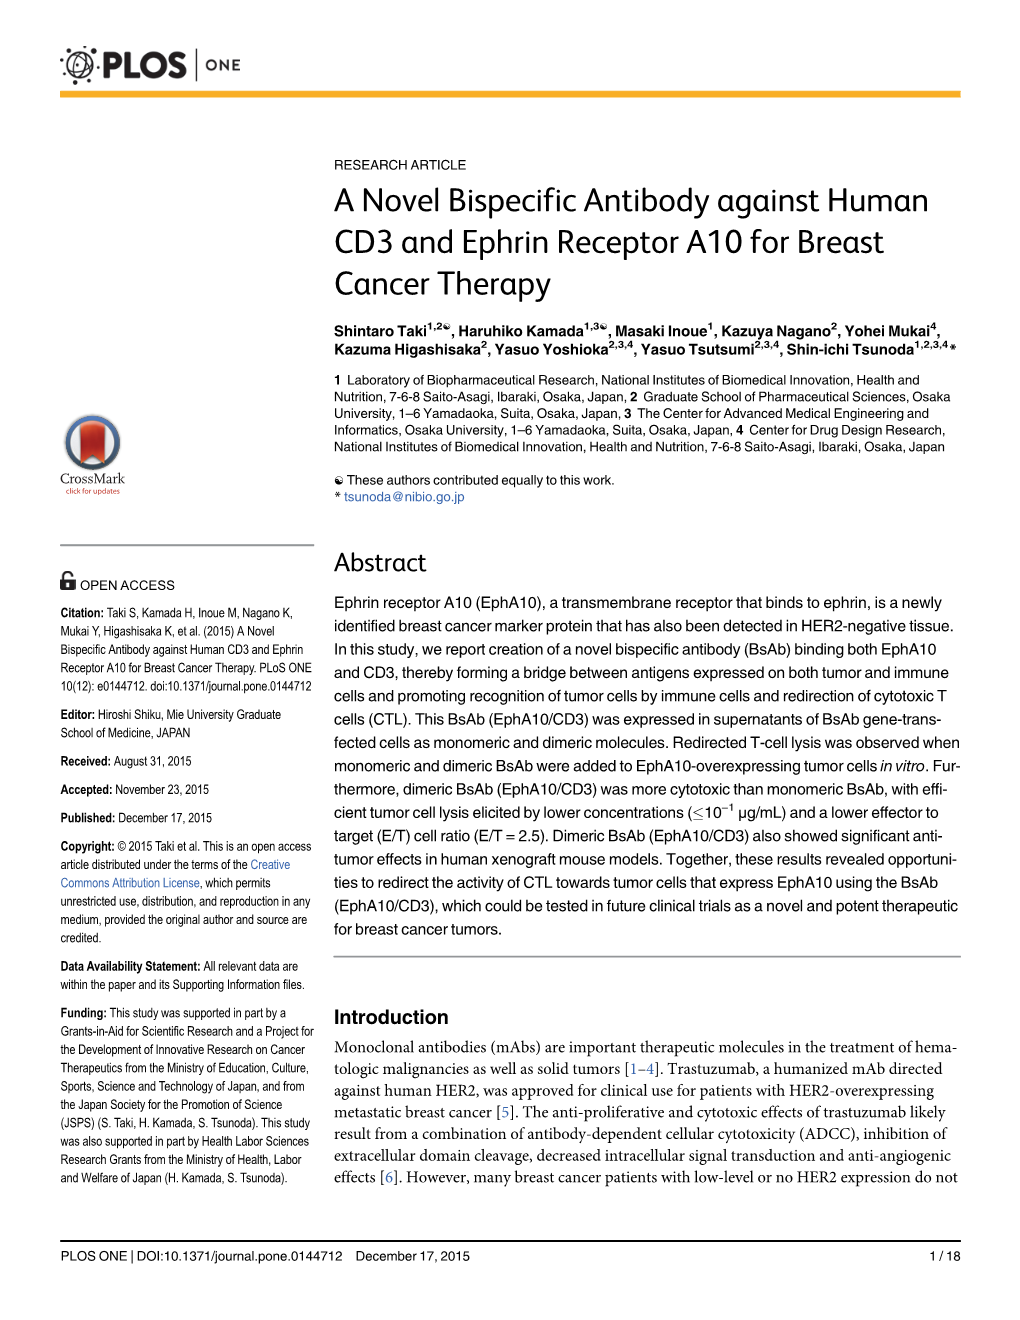 A Novel Bispecific Antibody Against Human CD3 and Ephrin Receptor A10 for Breast Cancer Therapy